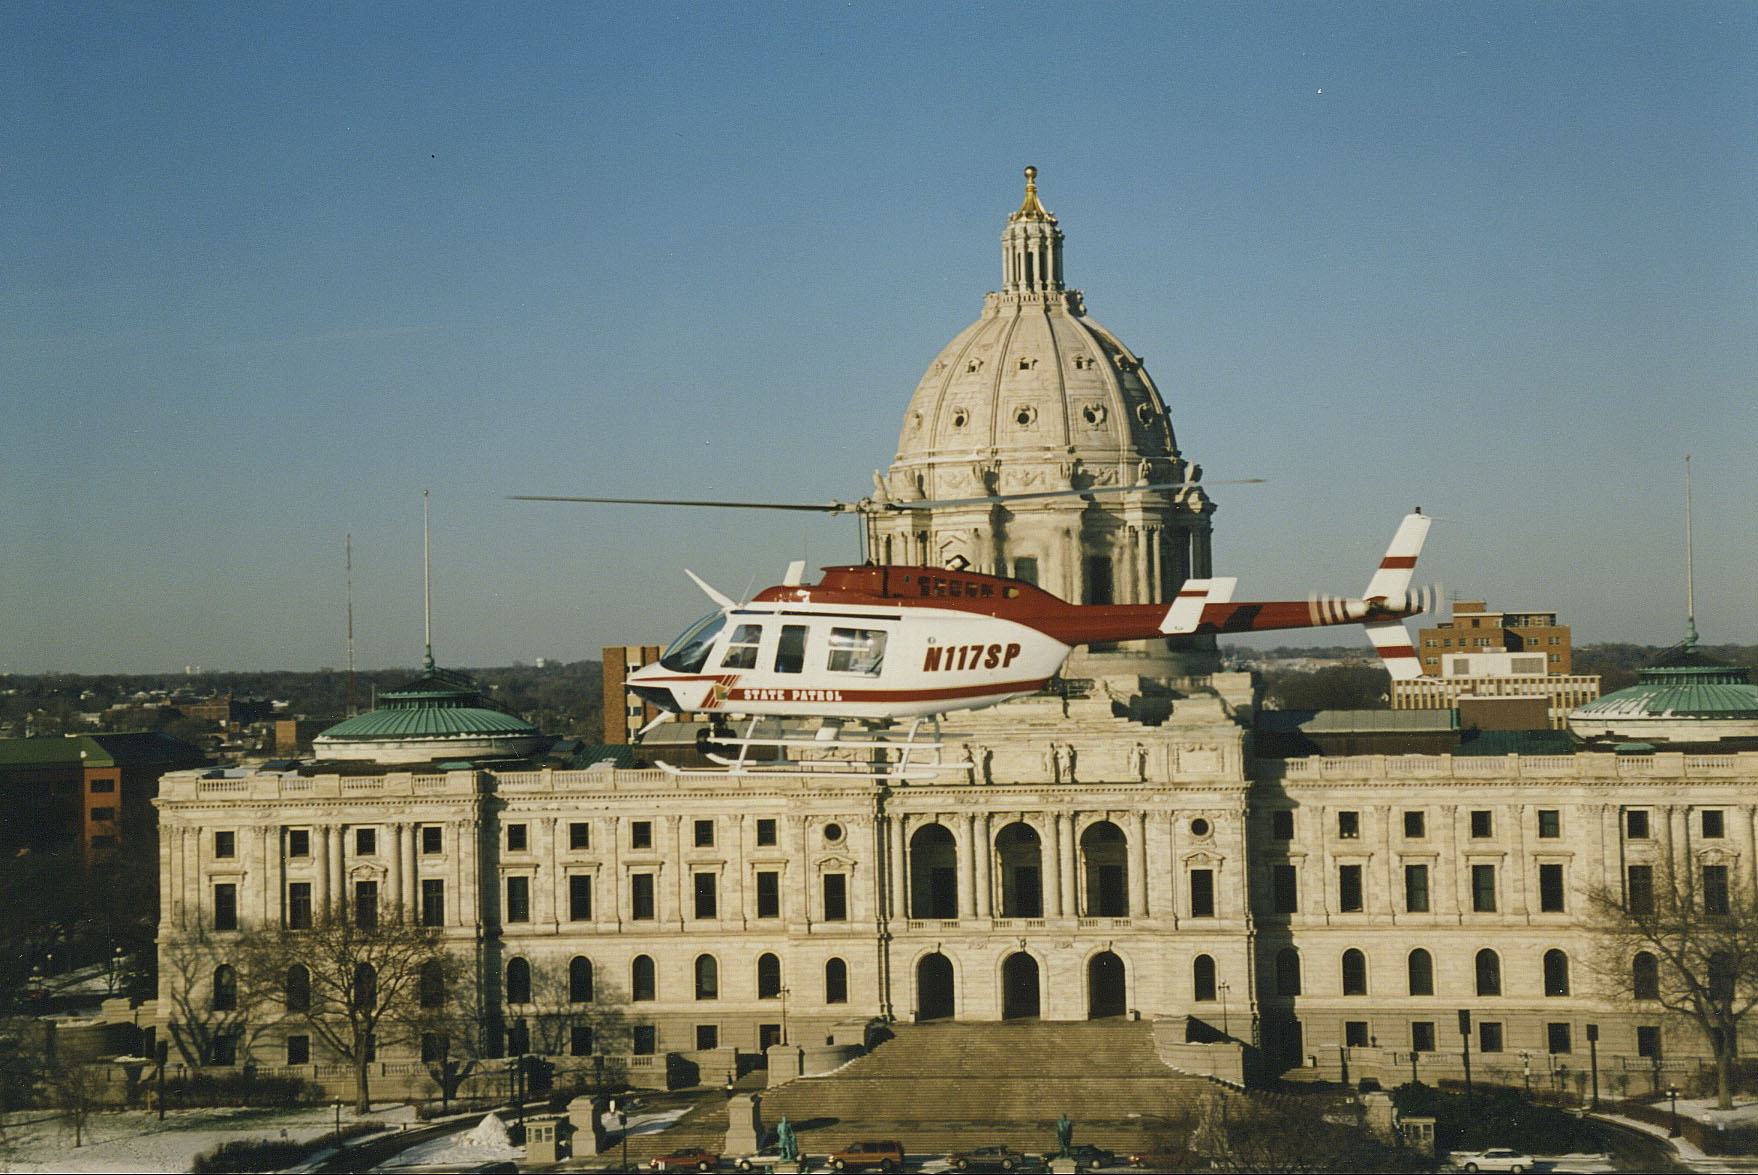 An early state patrol helicopter hovering near the Minnesota Capitol building